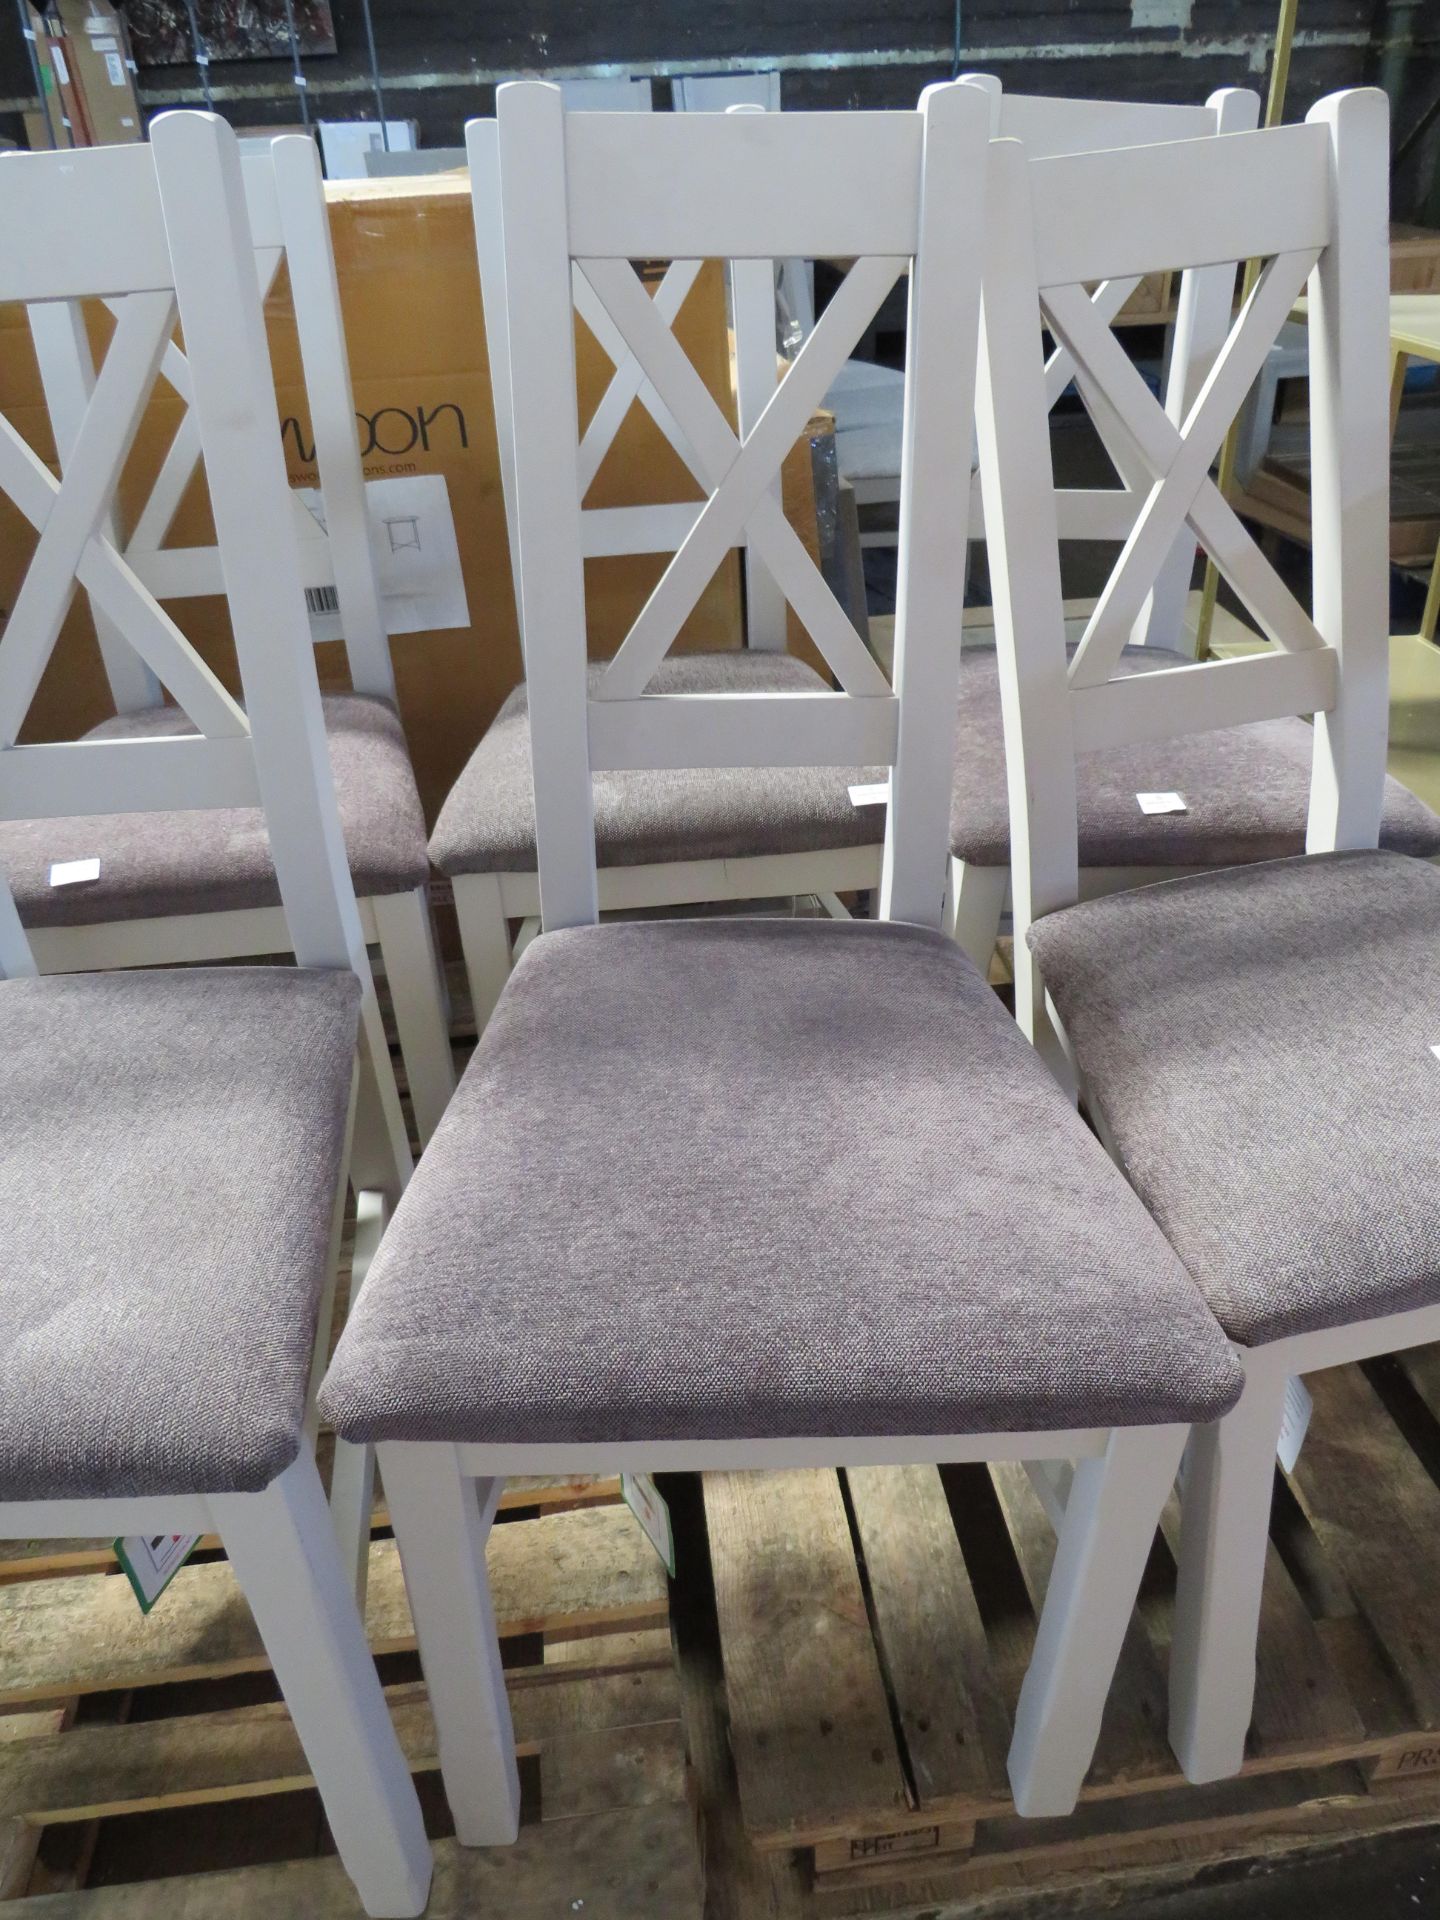 Oak Furnitureland Kemble Painted Chair with Plain Charcoal Fabric Seat RRP 170.00 Match any table,